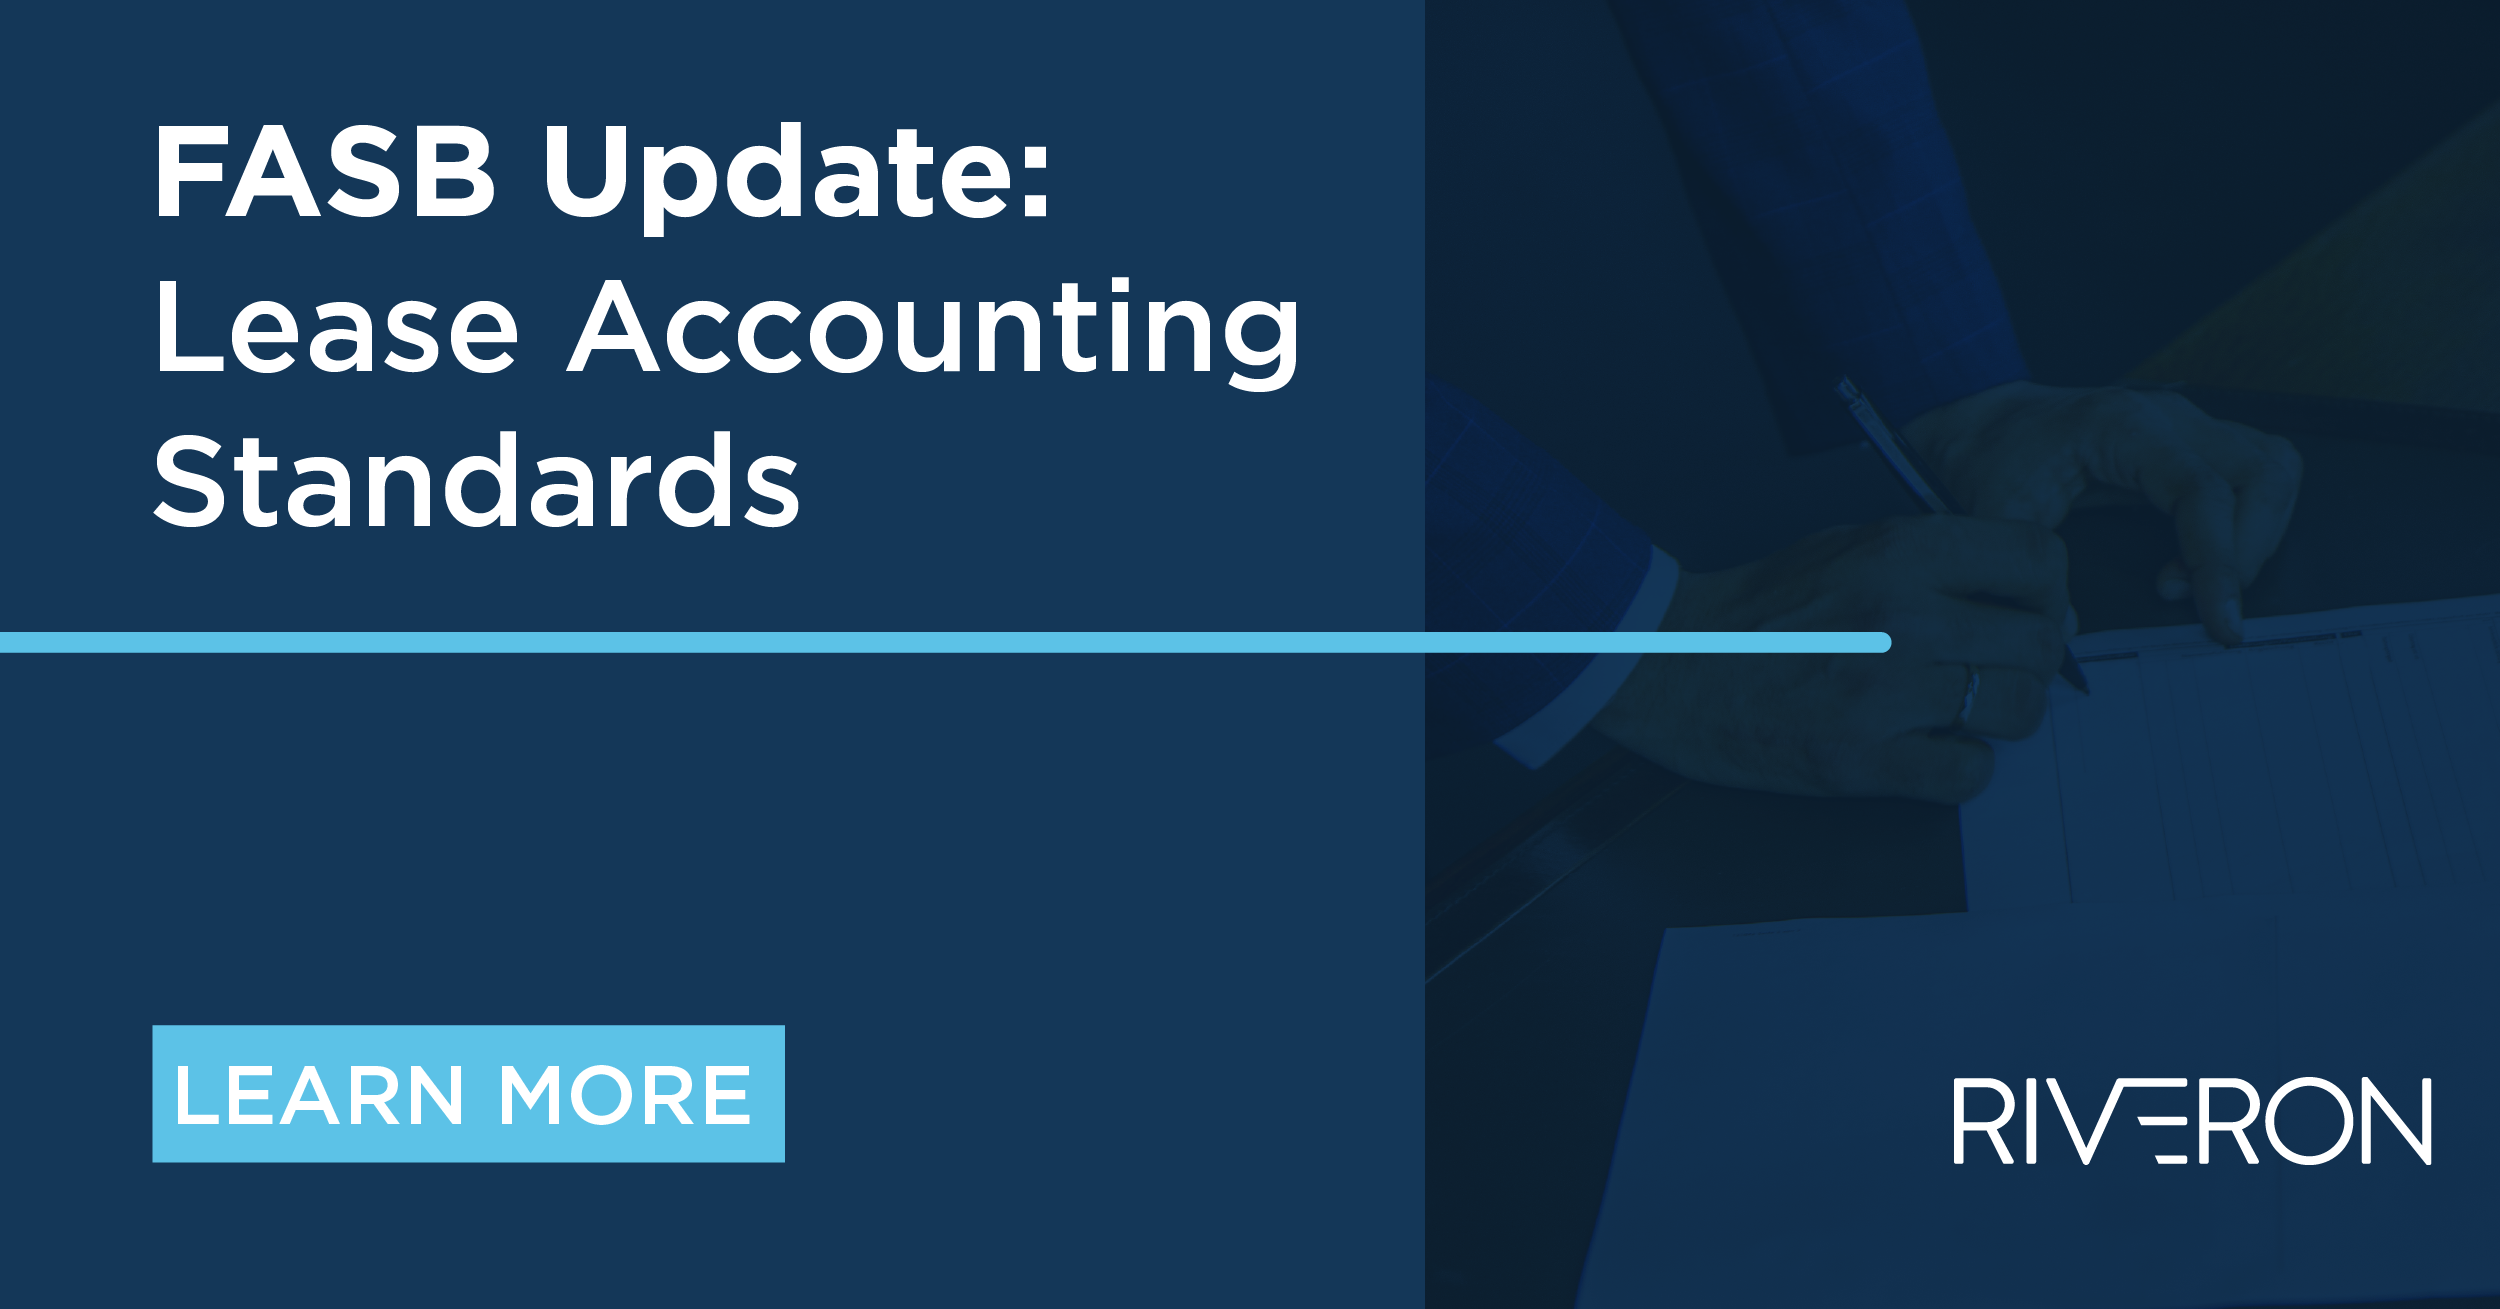 Changes to the New Lease Accounting Standard FASB Provides Updates